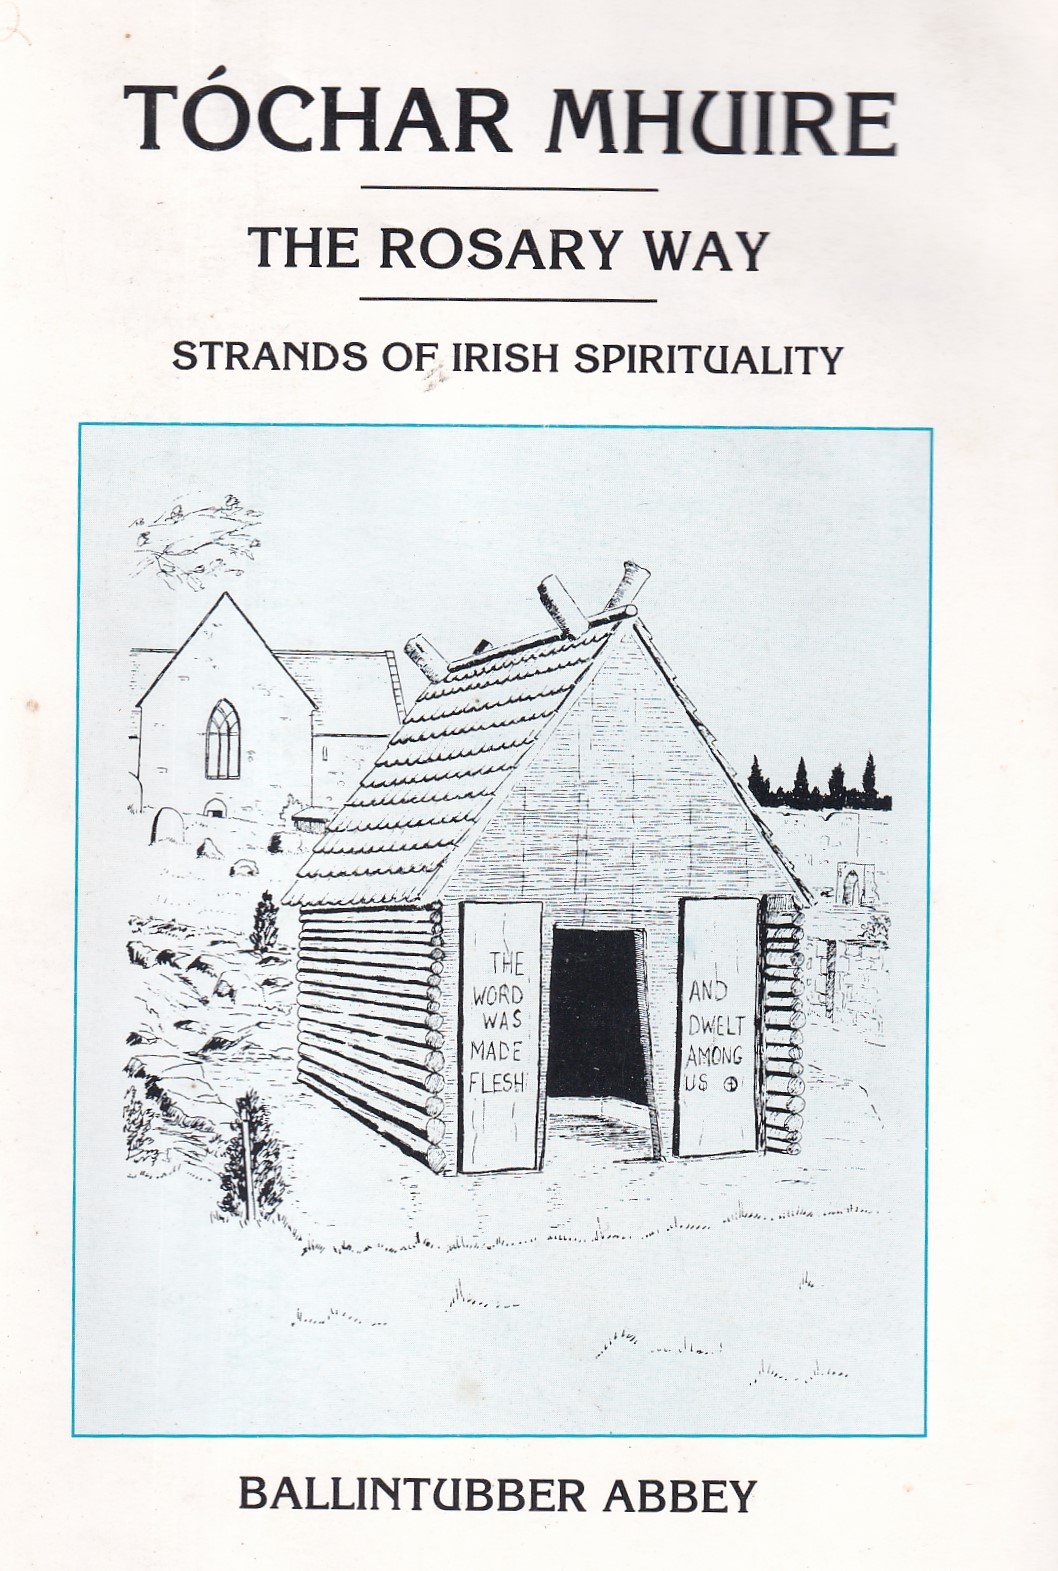 Tochar Mhuire. The Rosary Way – Strands of Irish Spirituality (Pamphlet) | Ballintubber Abbey | Charlie Byrne's